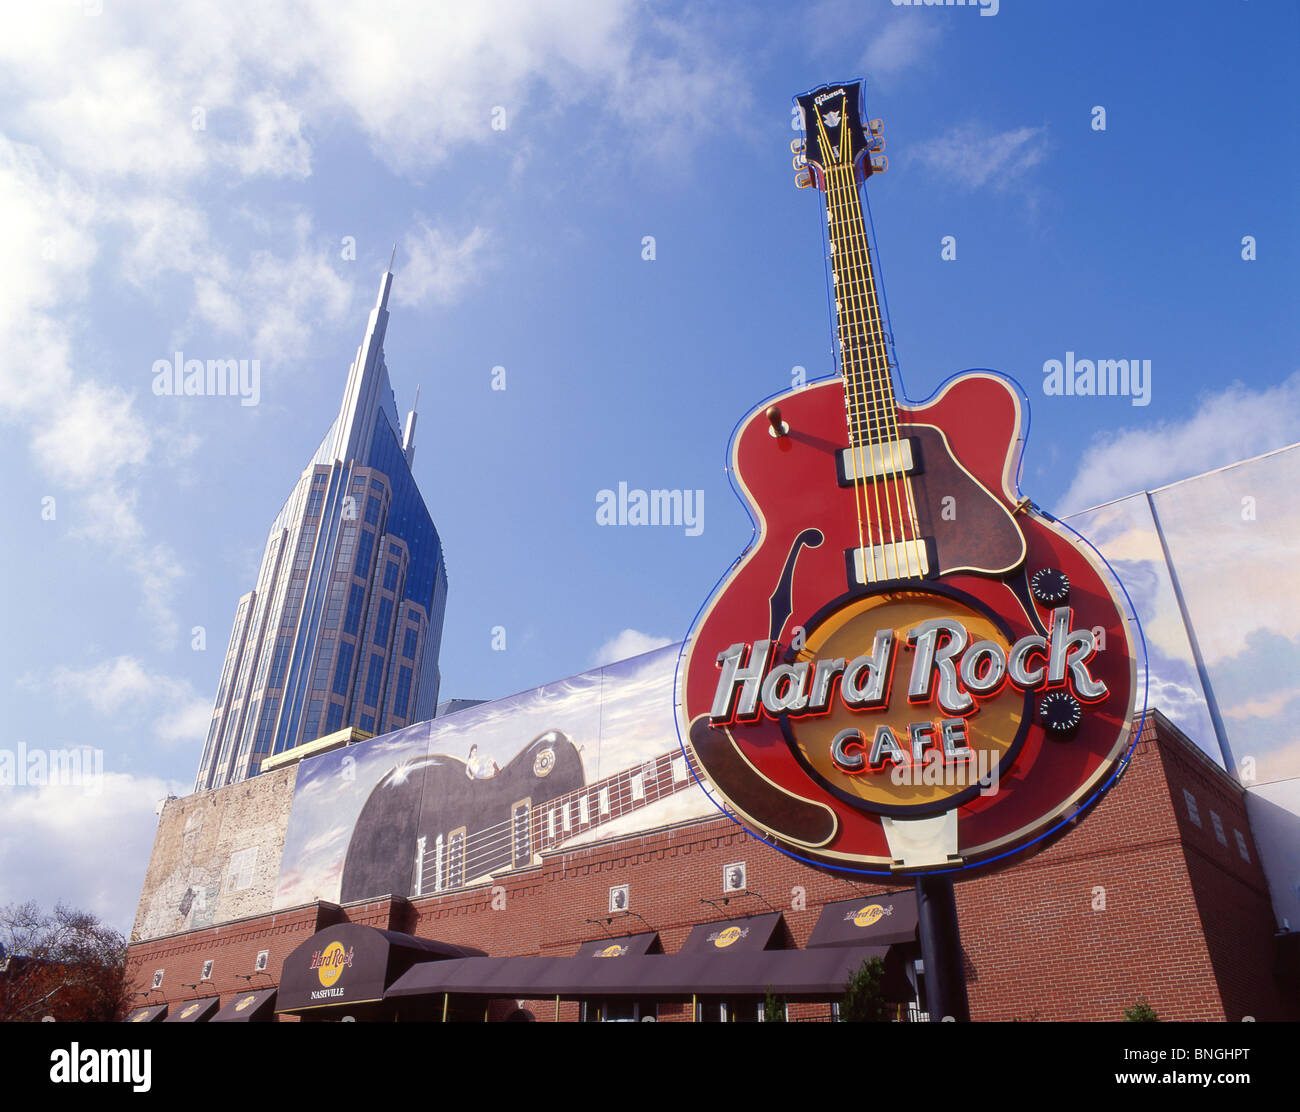 Hard Rock Cafe guitar sign, Nashville, Tennessee, United States of America Stock Photo